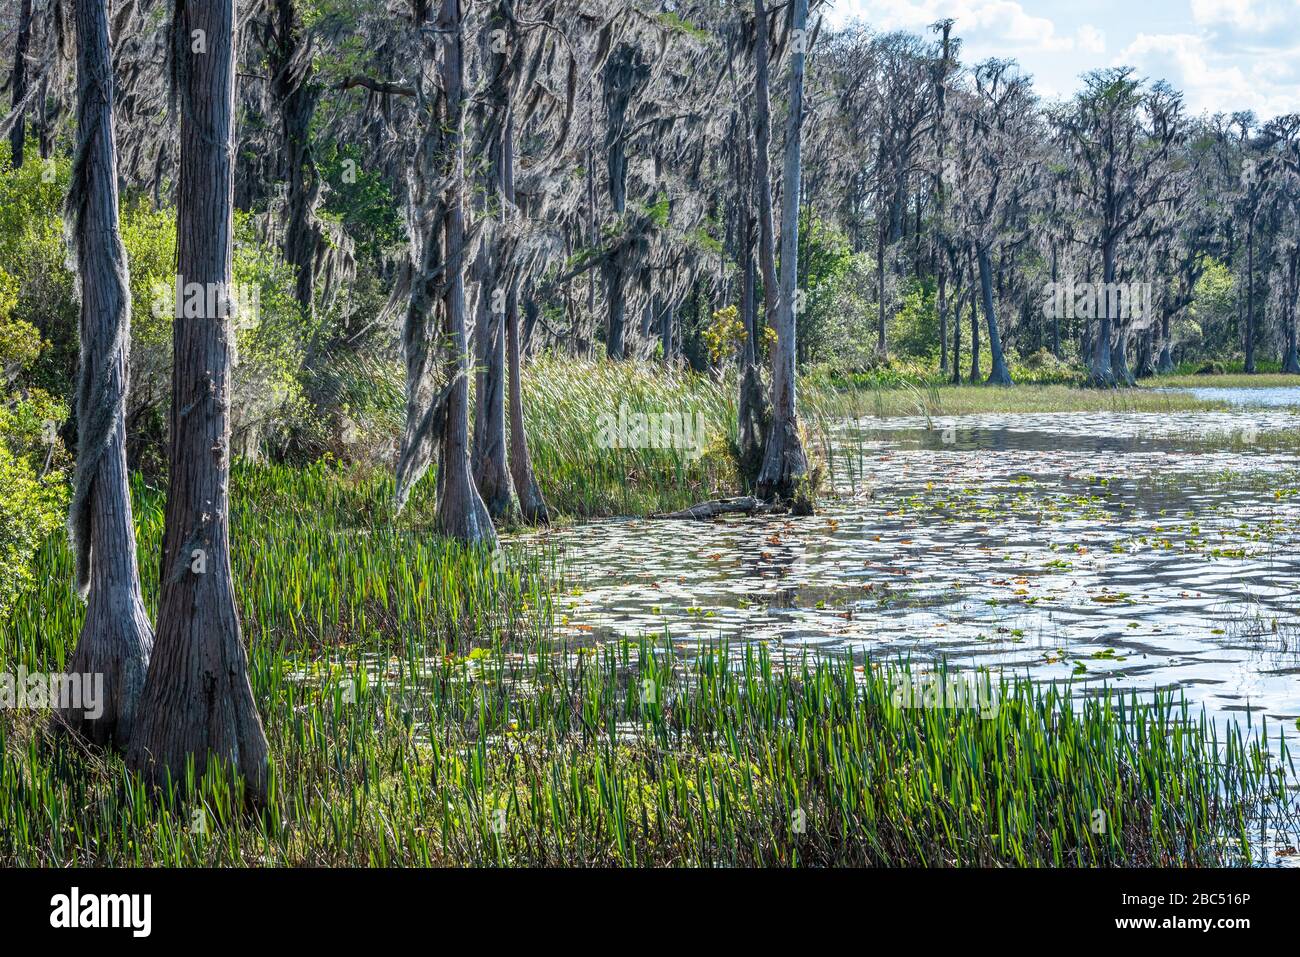 Florida bald Cypress trees with Spanish moss along the shoreline of Dixie Lake in Clermont, Florida's Lake Louisa State Park. (USA) Stock Photo